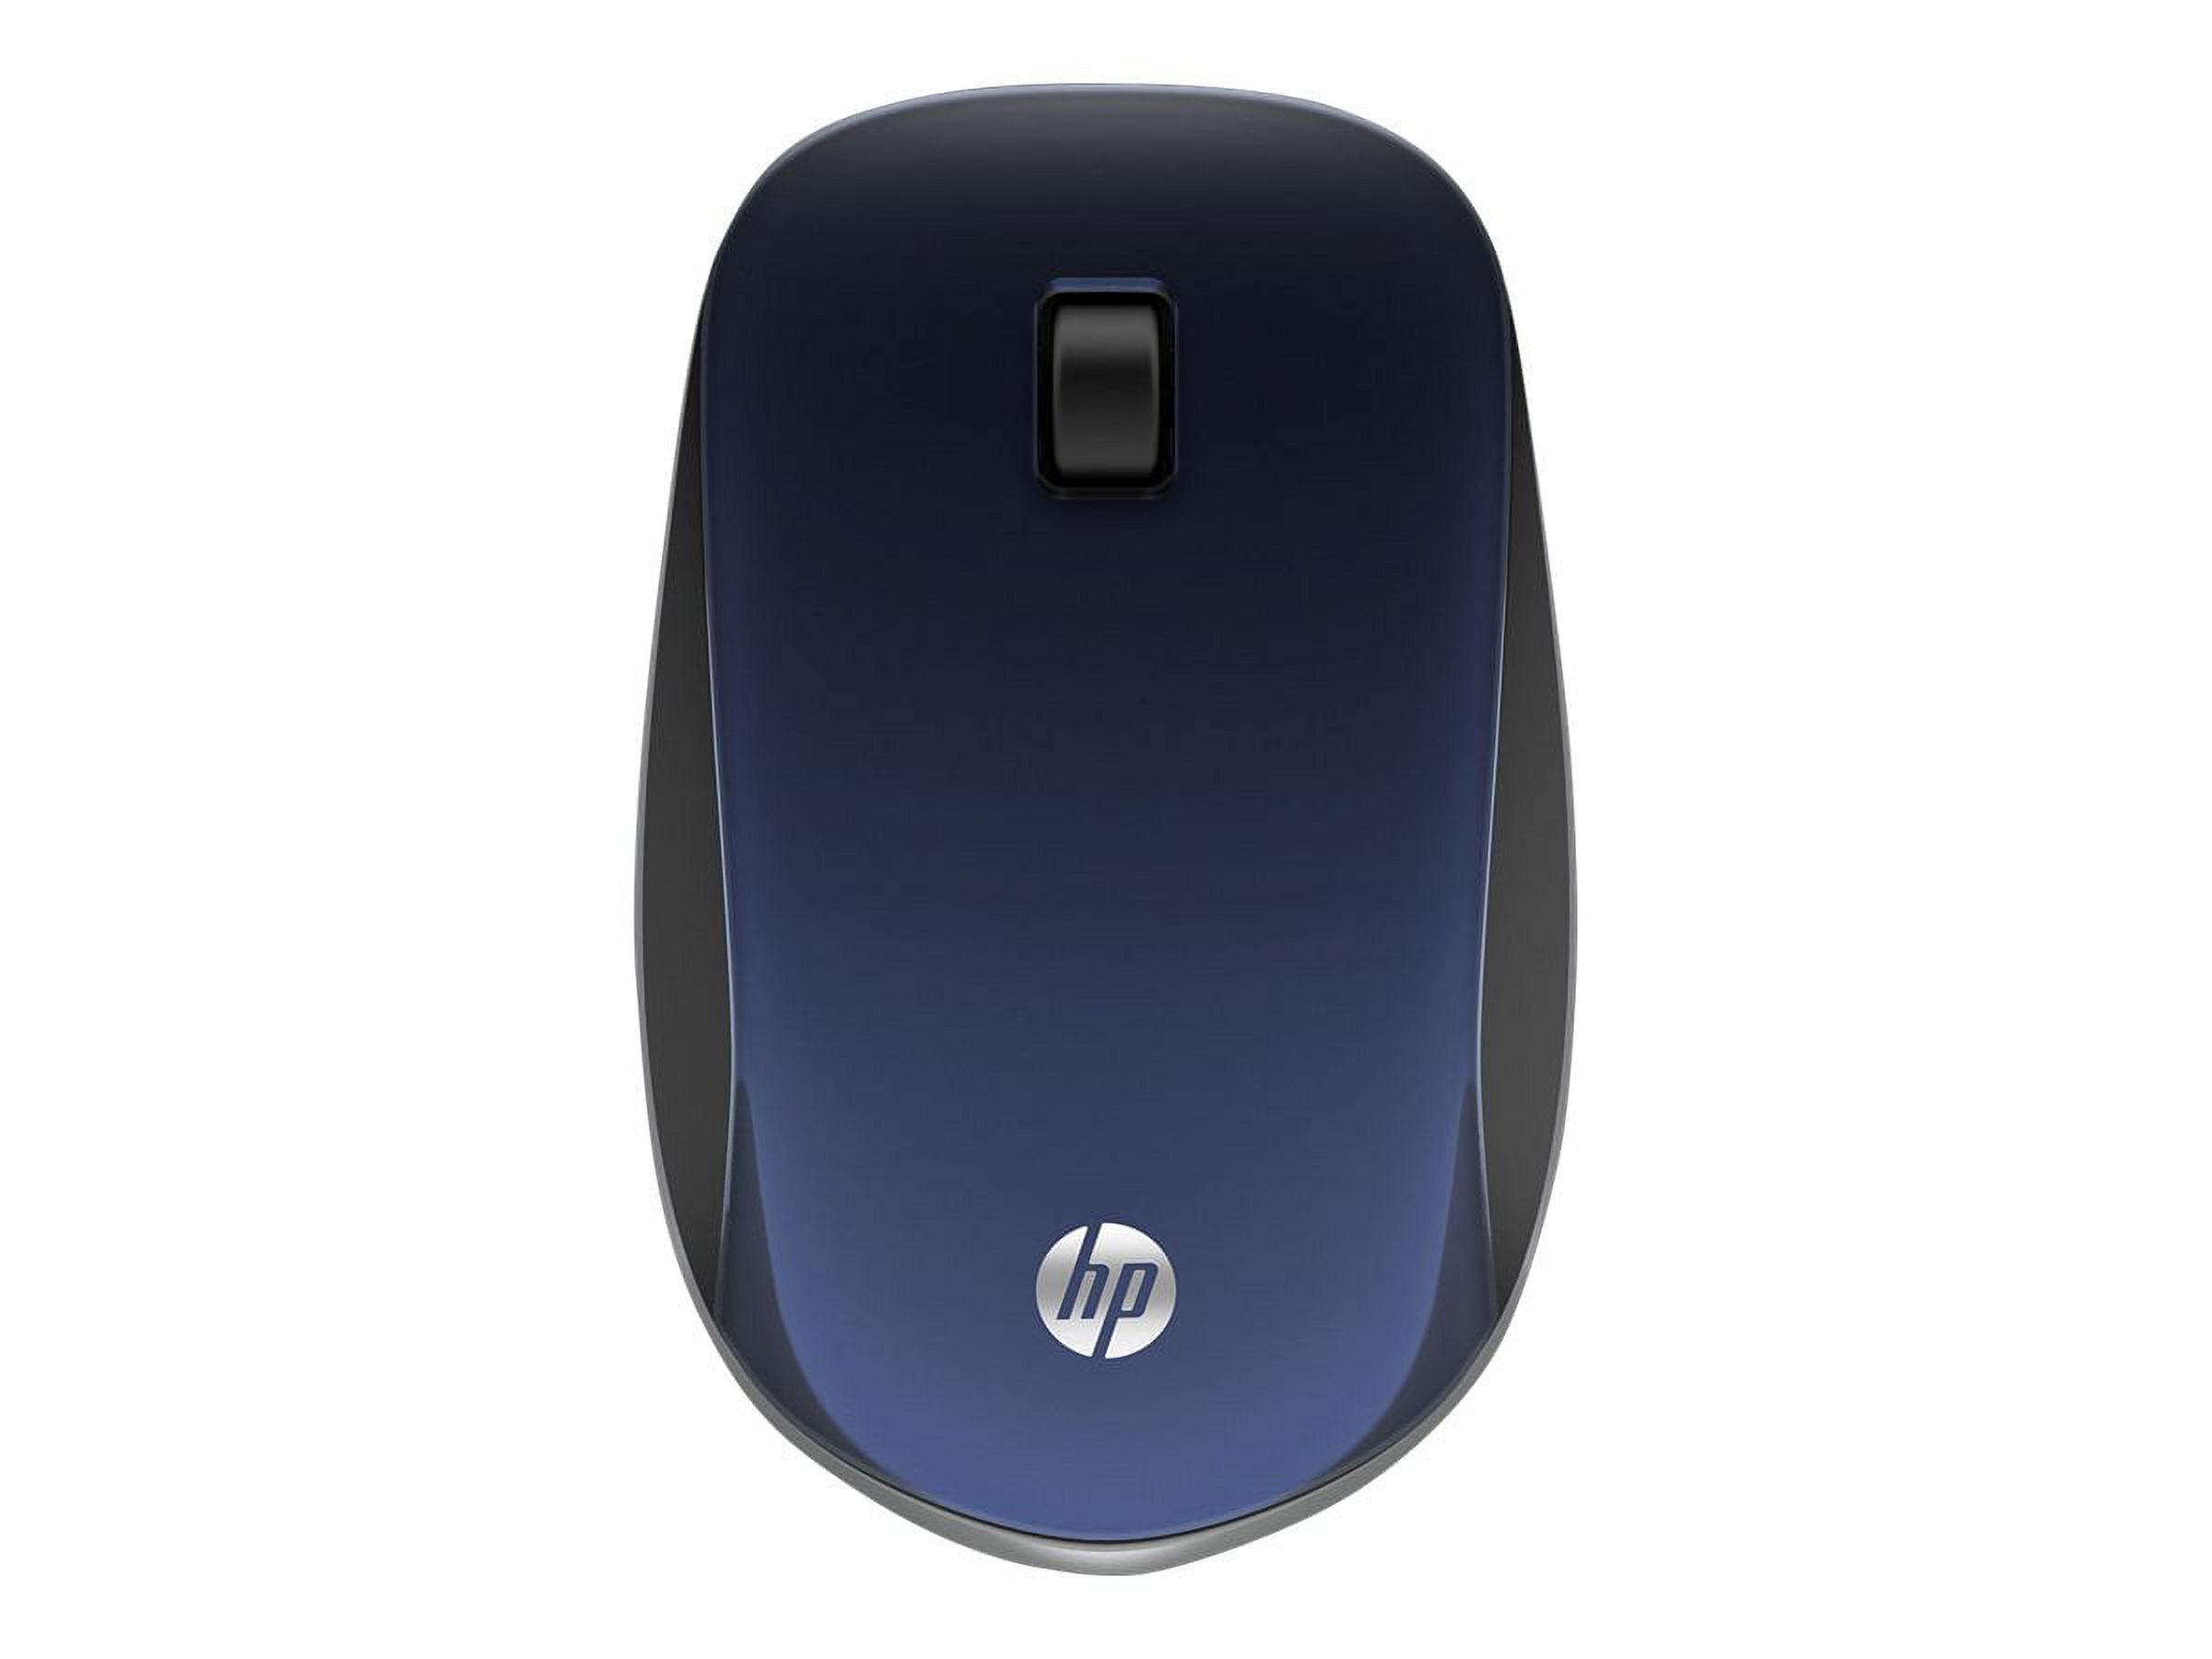 HP Wireless Mouse Z4000 (Blue) - image 3 of 5